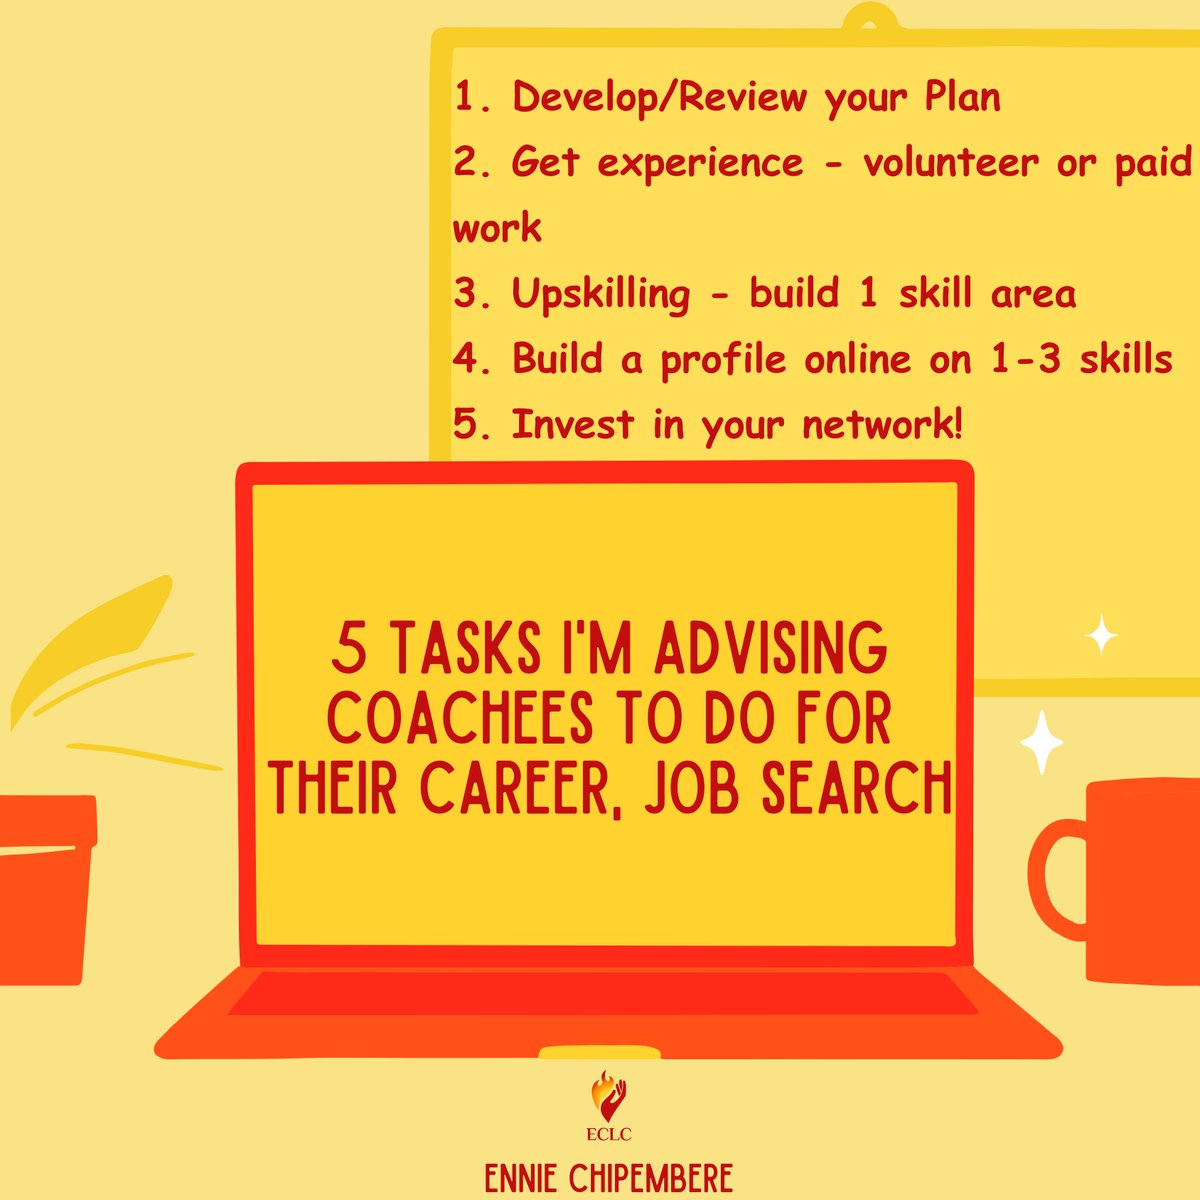 5 tasks I'm advising coachees to do for their career development or job search

1. Develop or review your Plan
2. Get experience—volunteer or paid work
3. Upskilling: build one skill area
4. Build a profile online on 1-3 skills
5. Invest in your network!

#CoachEnnie #careercoach